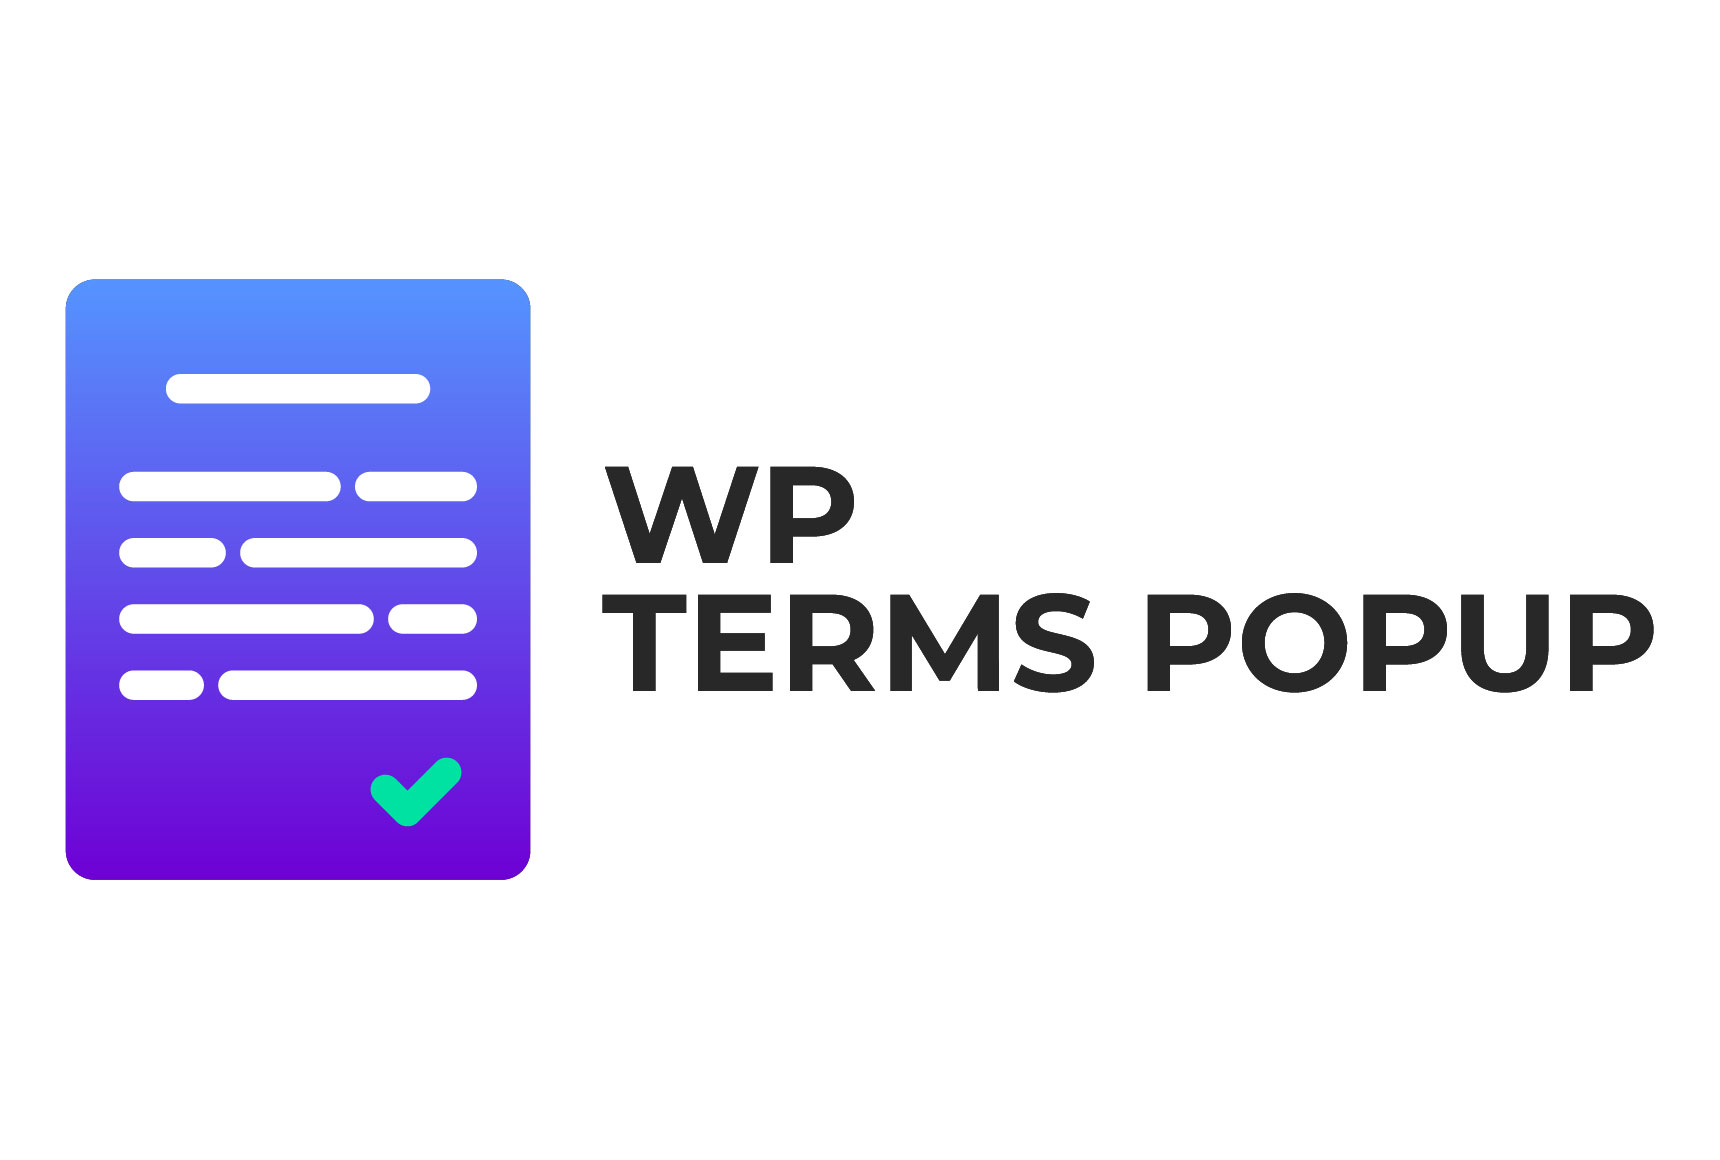 WP Terms Popup masthead image